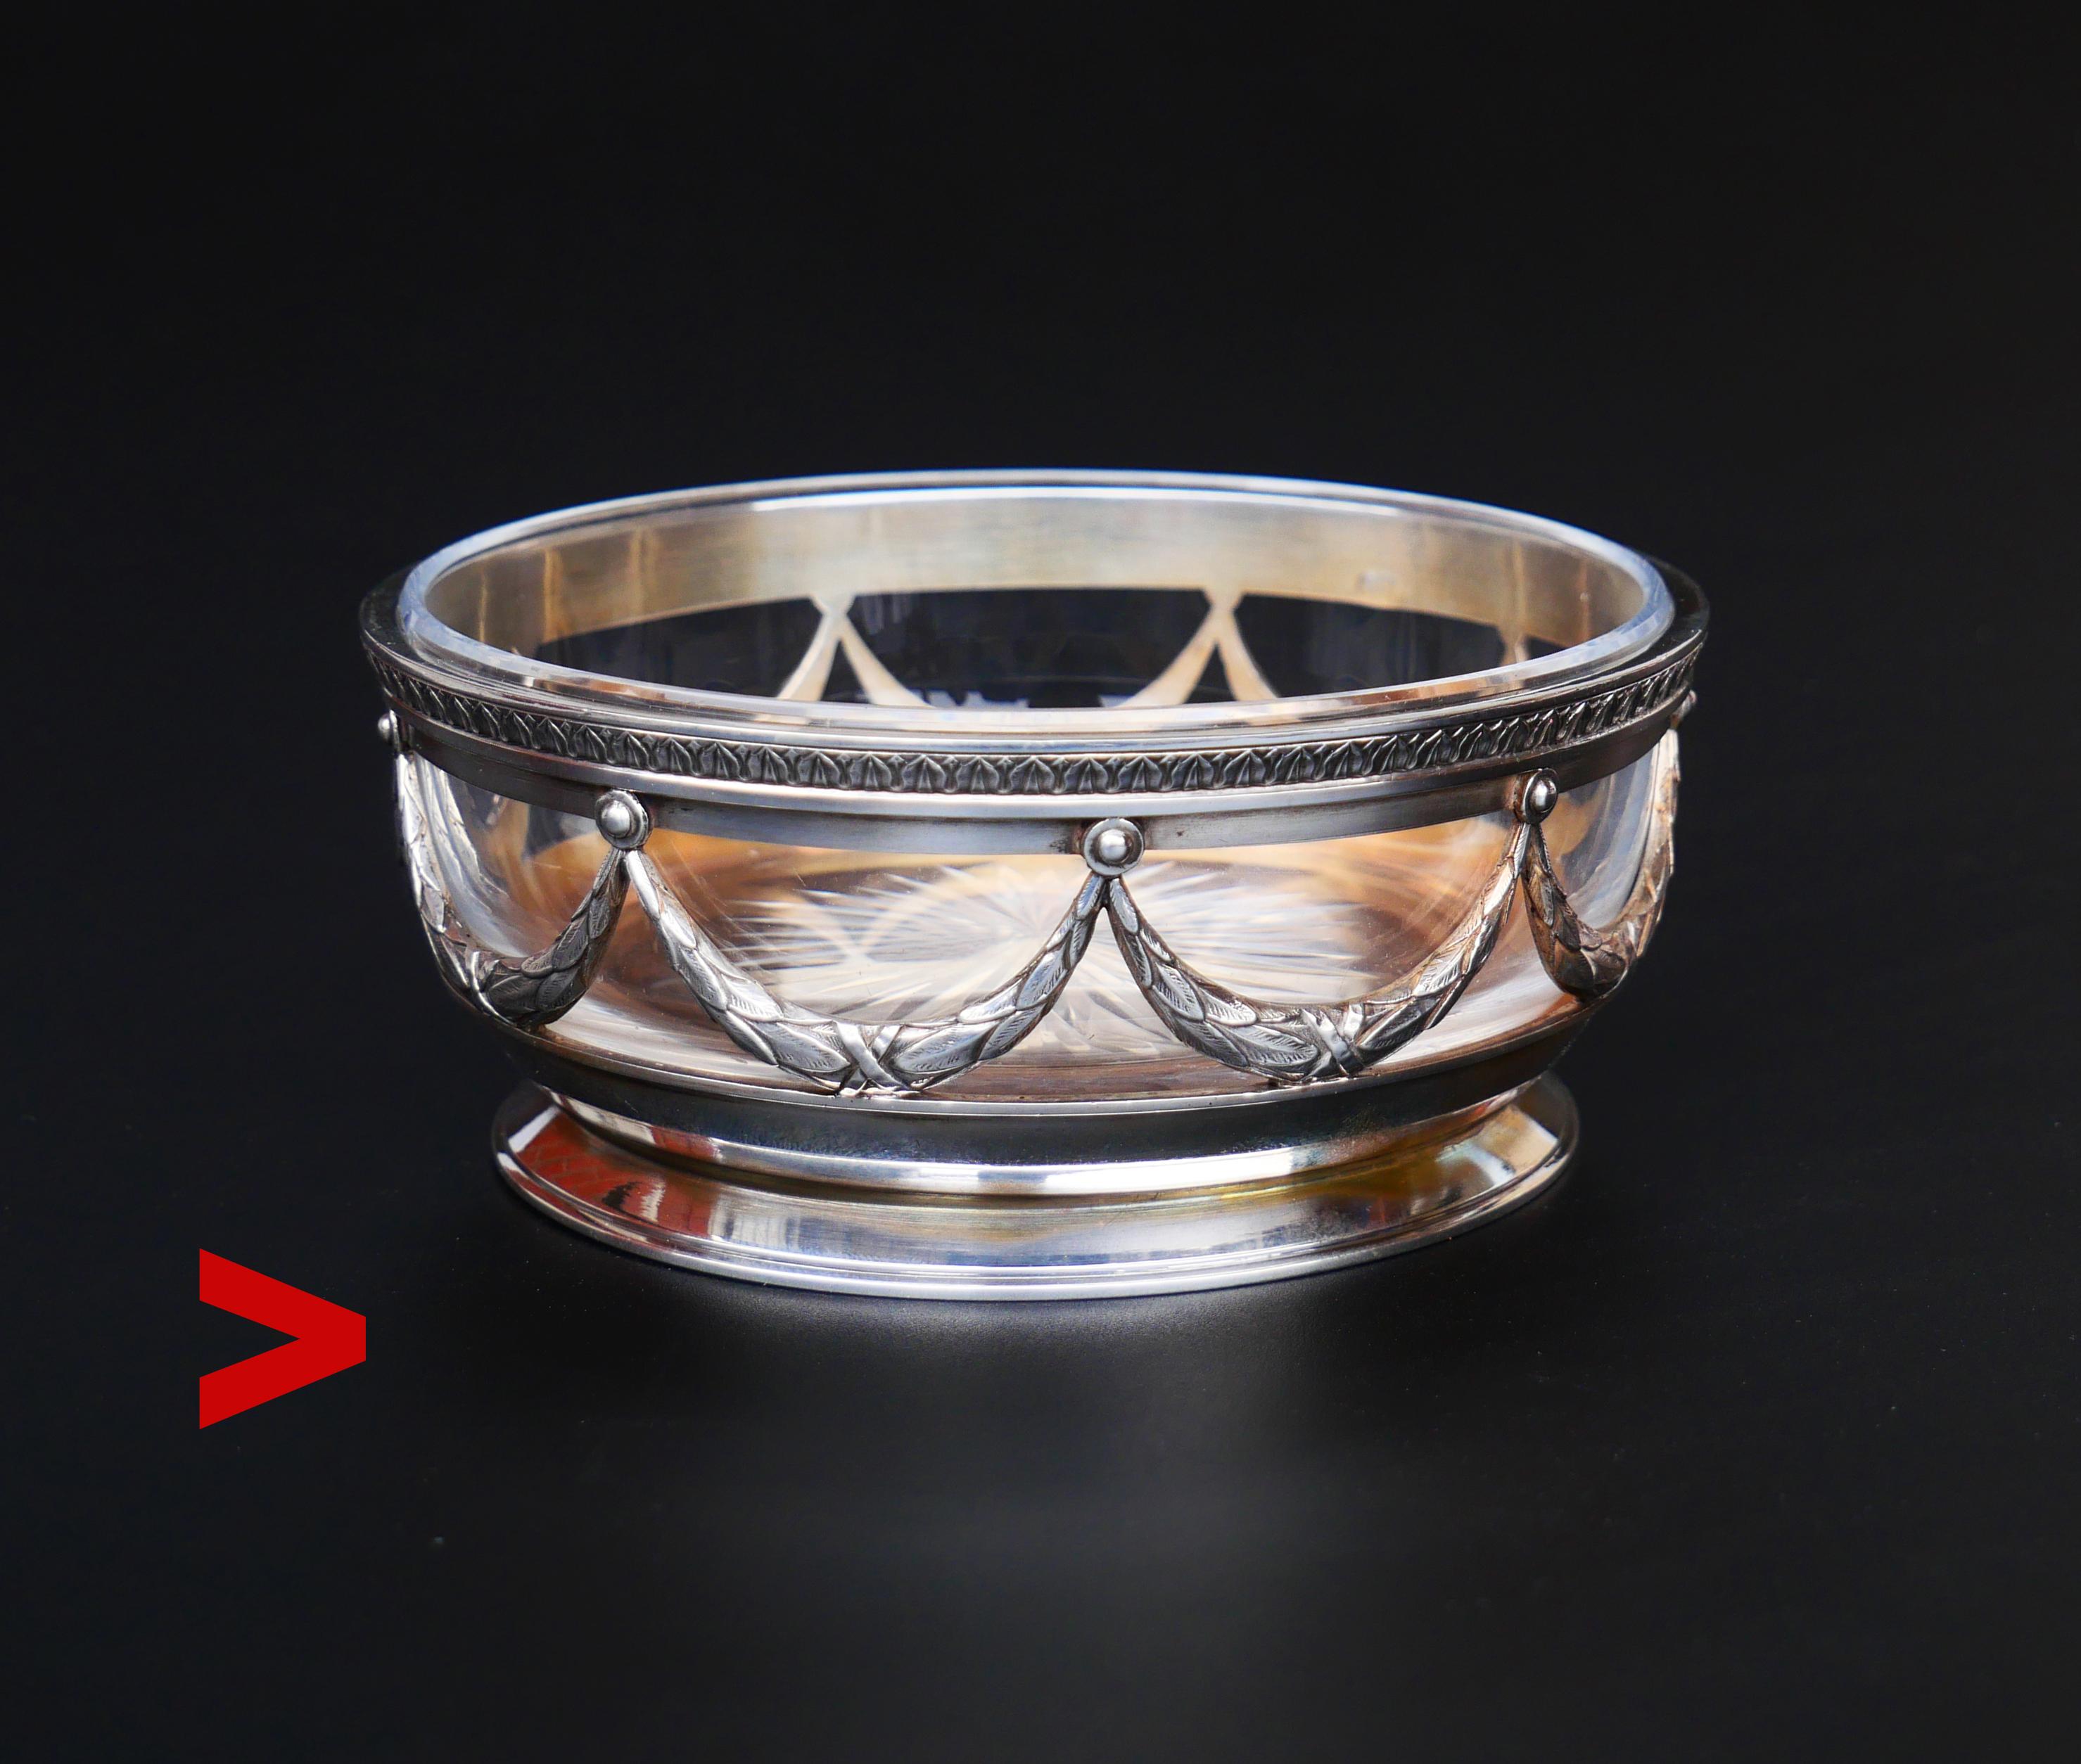 Fine Faberge solid Silver and cut crystal glass Bowl in Empire / Neoclassical style with original crystal glass bowl / insert, with starburst cut on the bottom..

Russian Imperial standard hallmarks confirming solid Silver 85 alloy, used between